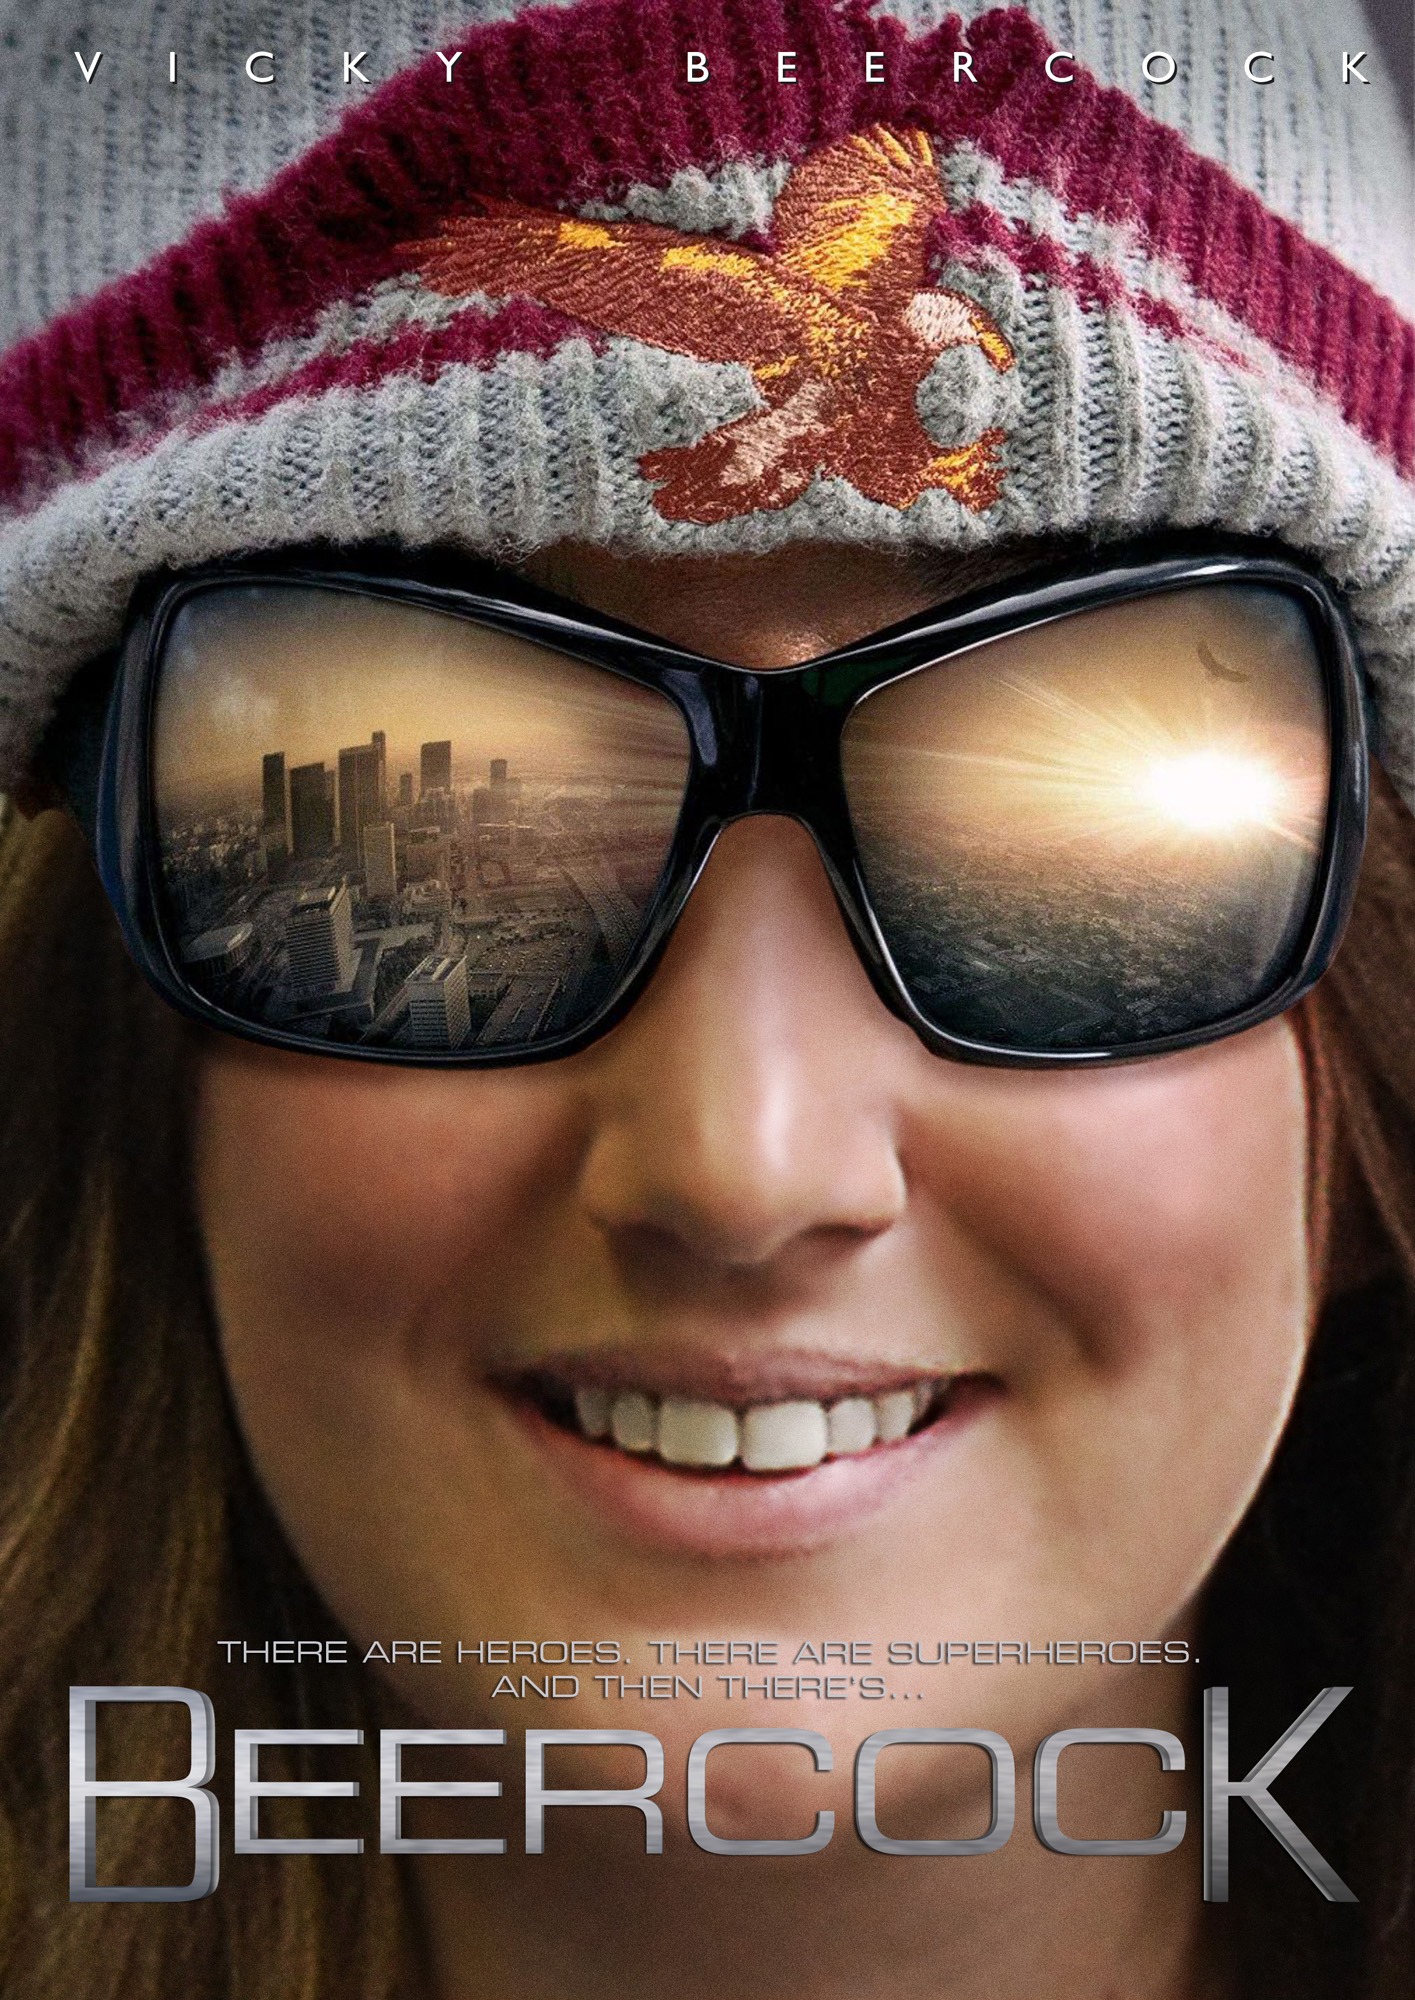 a woman wearing sunglasses in front of a city skyline